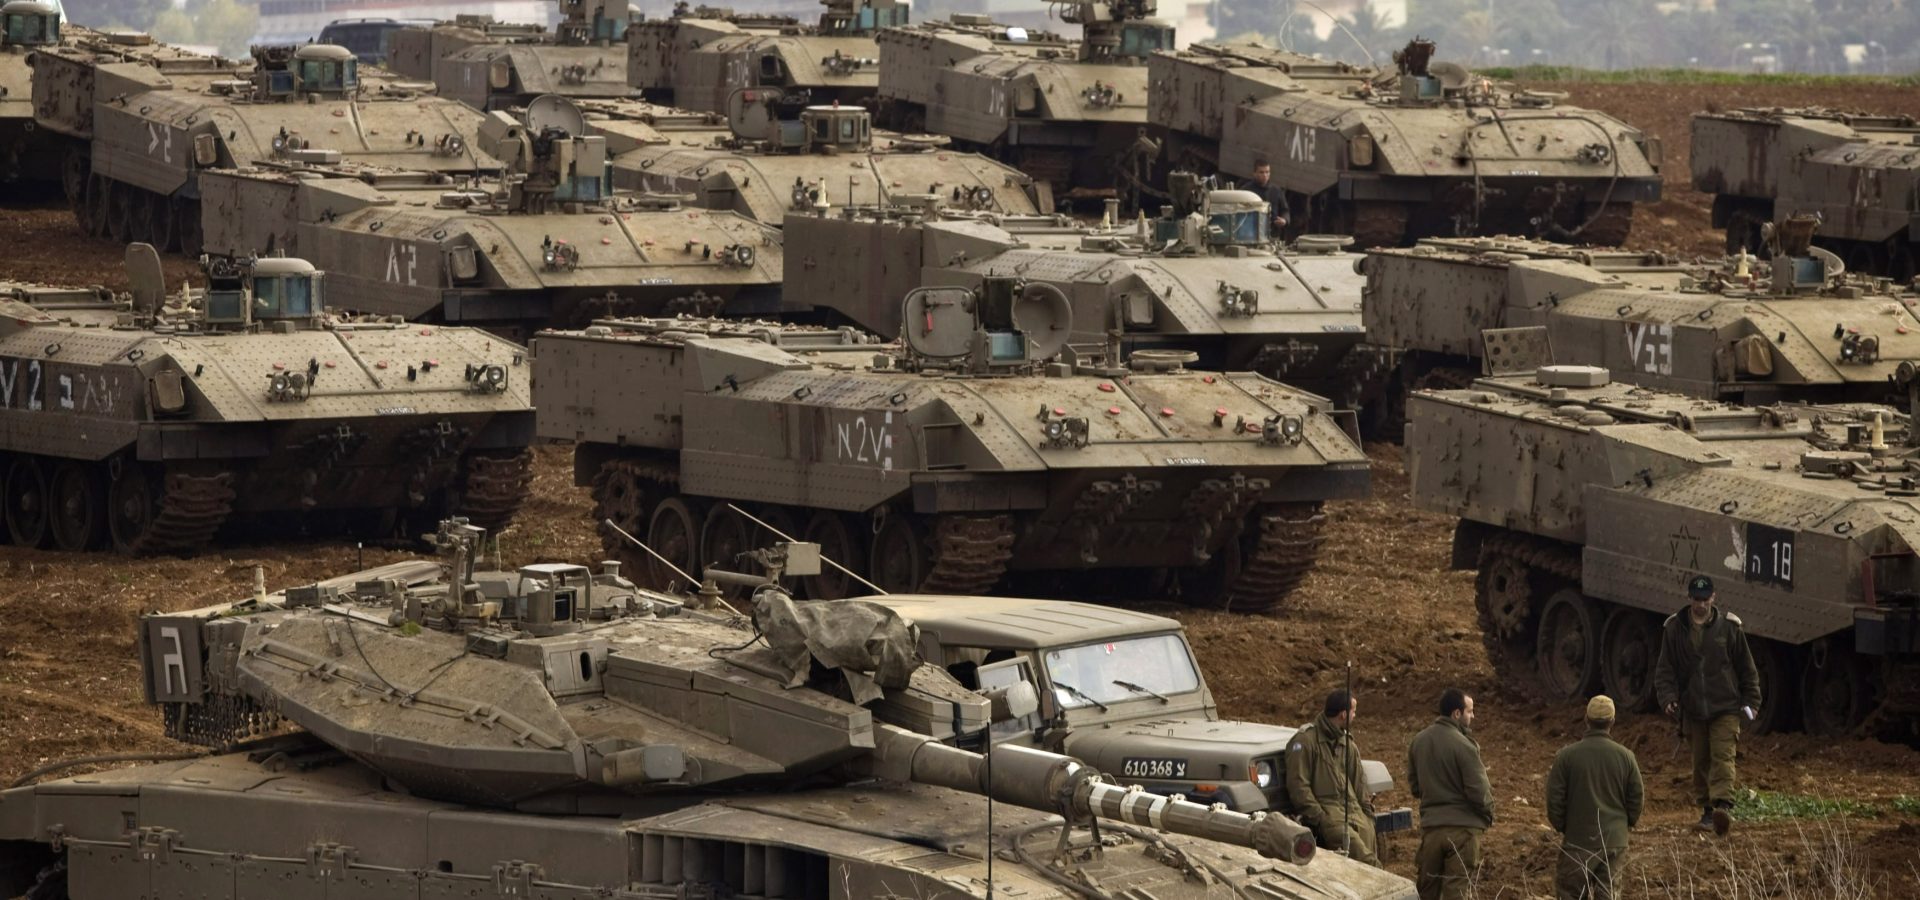 Israeli tanks are seen near Israel's border with the Gaza Strip, in southern Israel, Dec. 29, 2008 as Israel widened its deadliest-ever offensive against Gaza targeting homes, tunnels and government buildings. AP/Sebastian Scheiner)